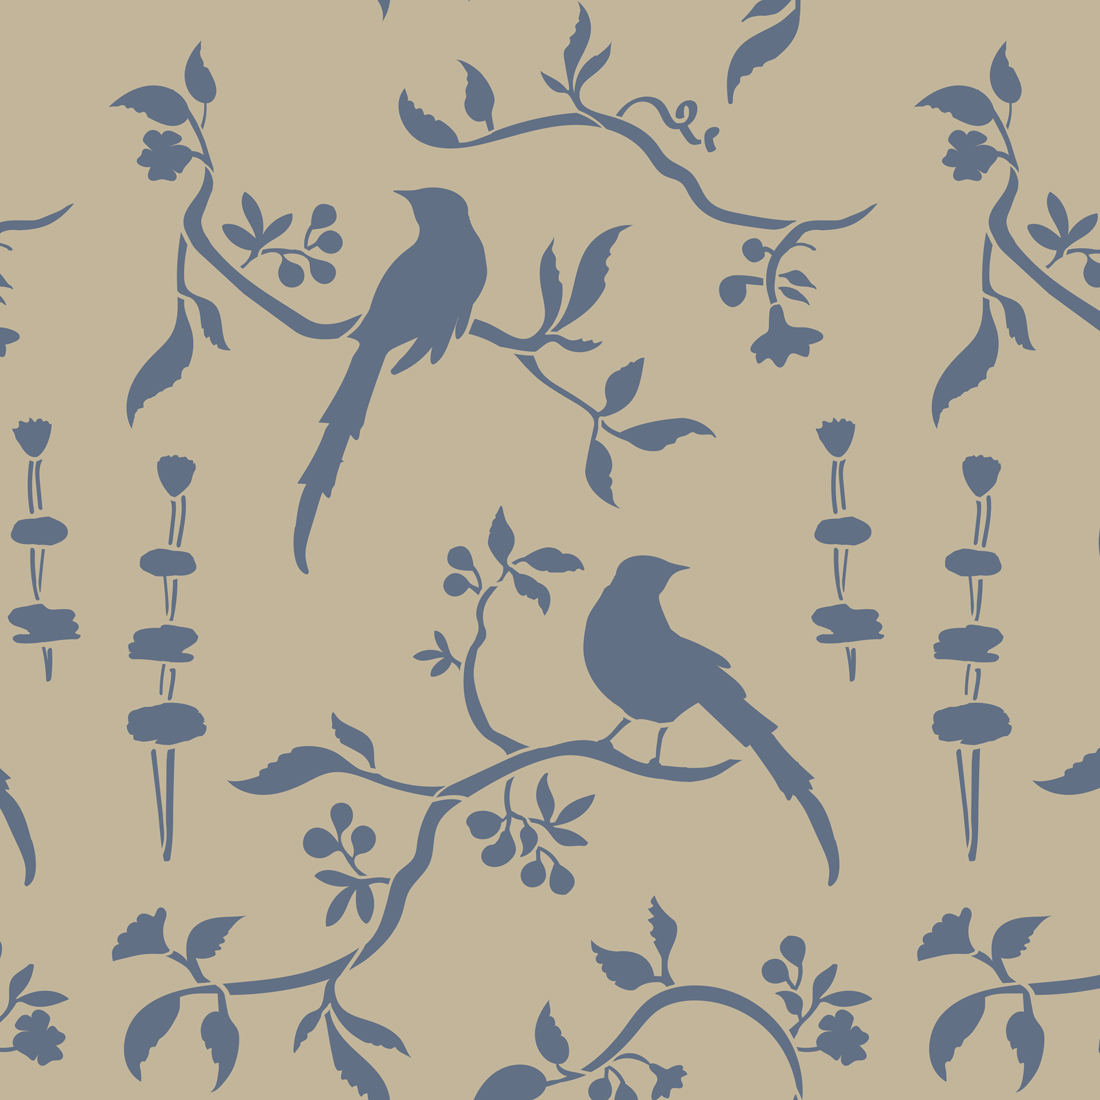 1613557348Cinoiserie-Birds-Country-Grey-and-Old-Violet-1.jpg